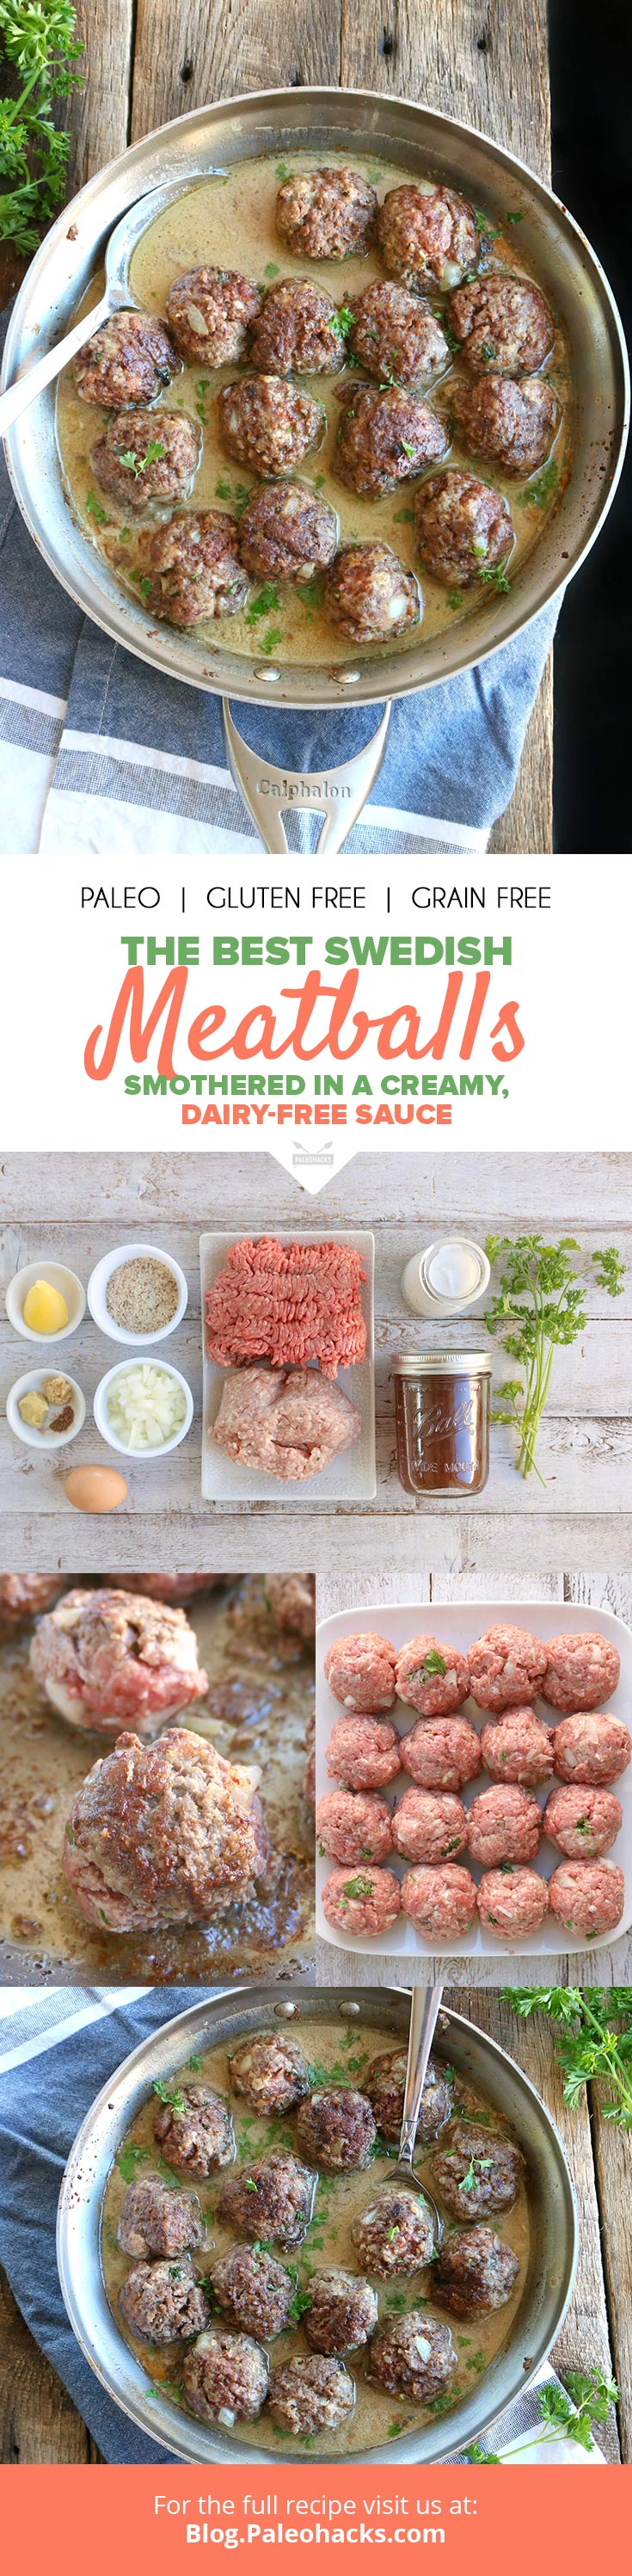 Smothered in a creamy, dairy-free sauce, these Swedish meatballs are deliciously decadent. You don't need to go to Ikea for these Swedish meatballs.